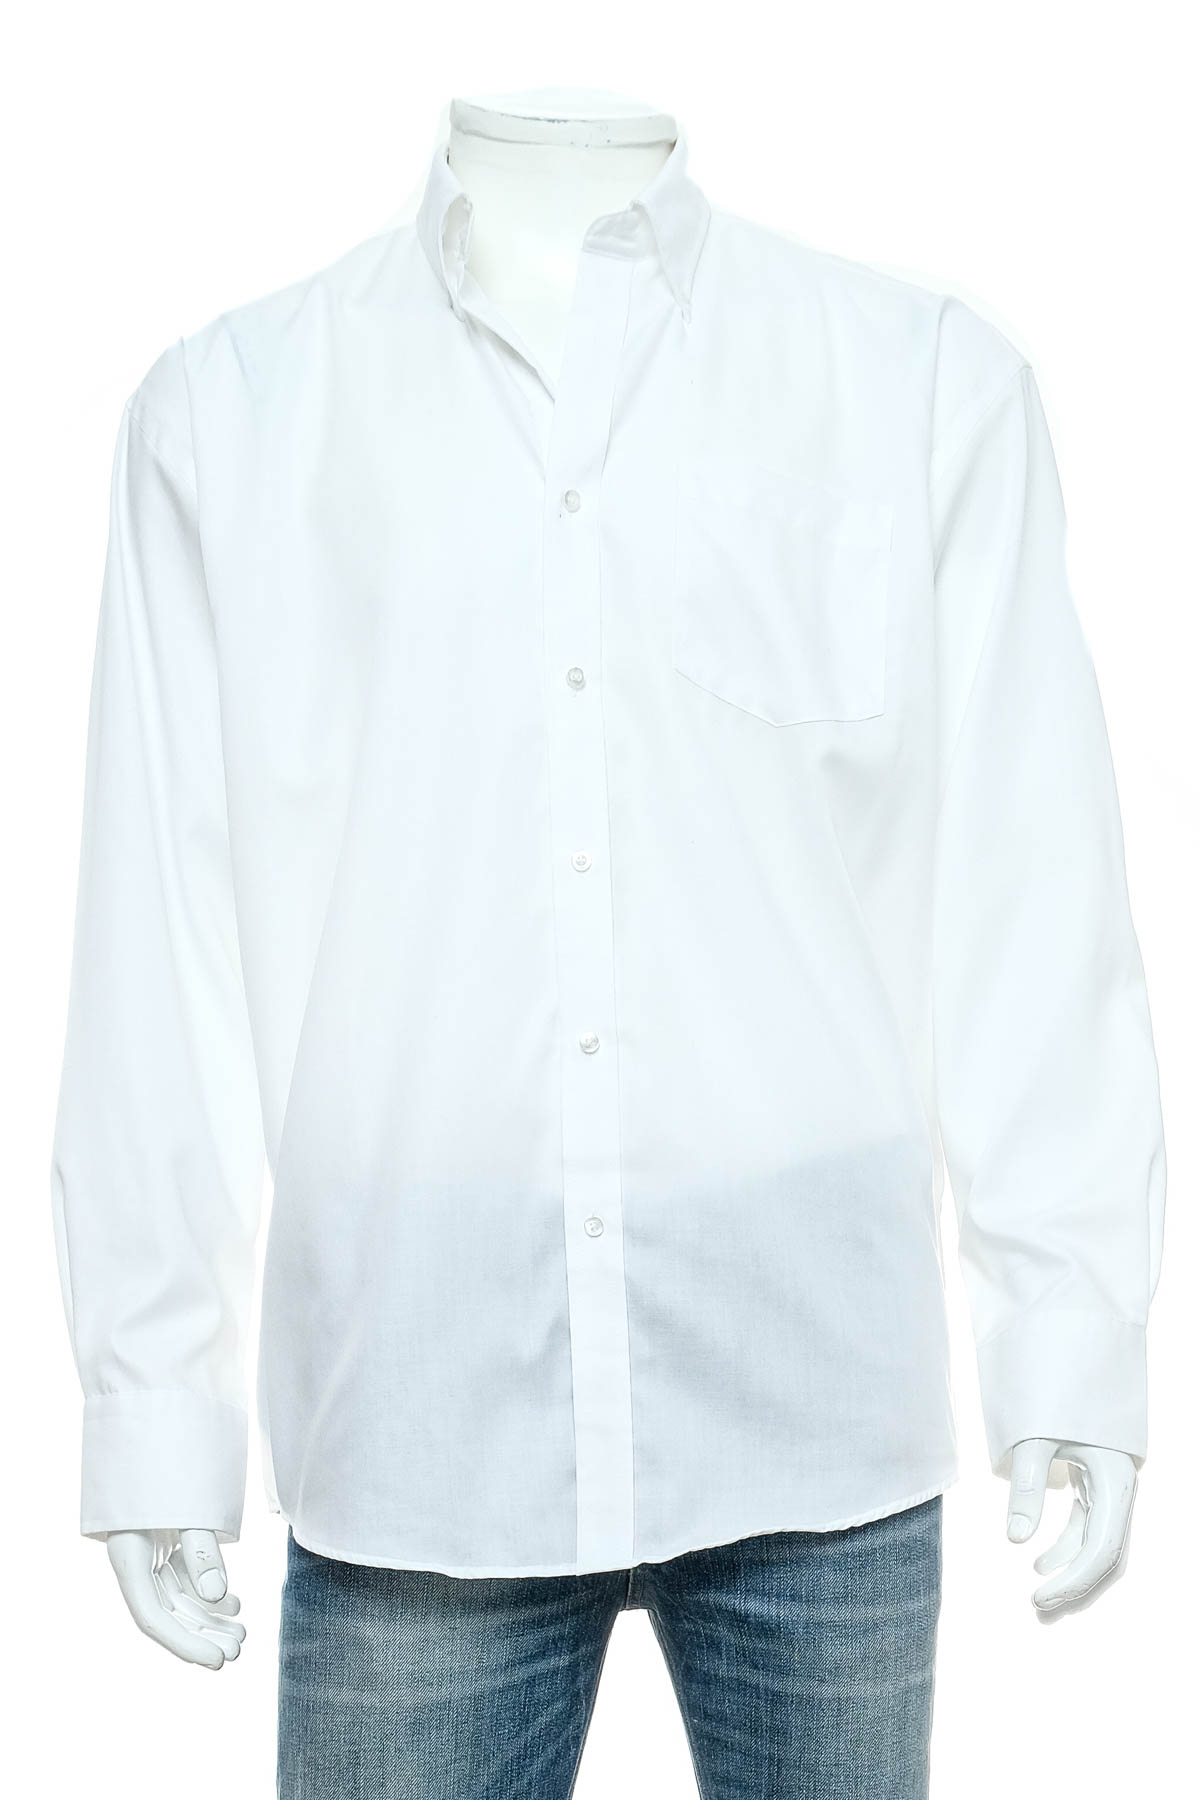 Men's shirt - Russell Collection - 0